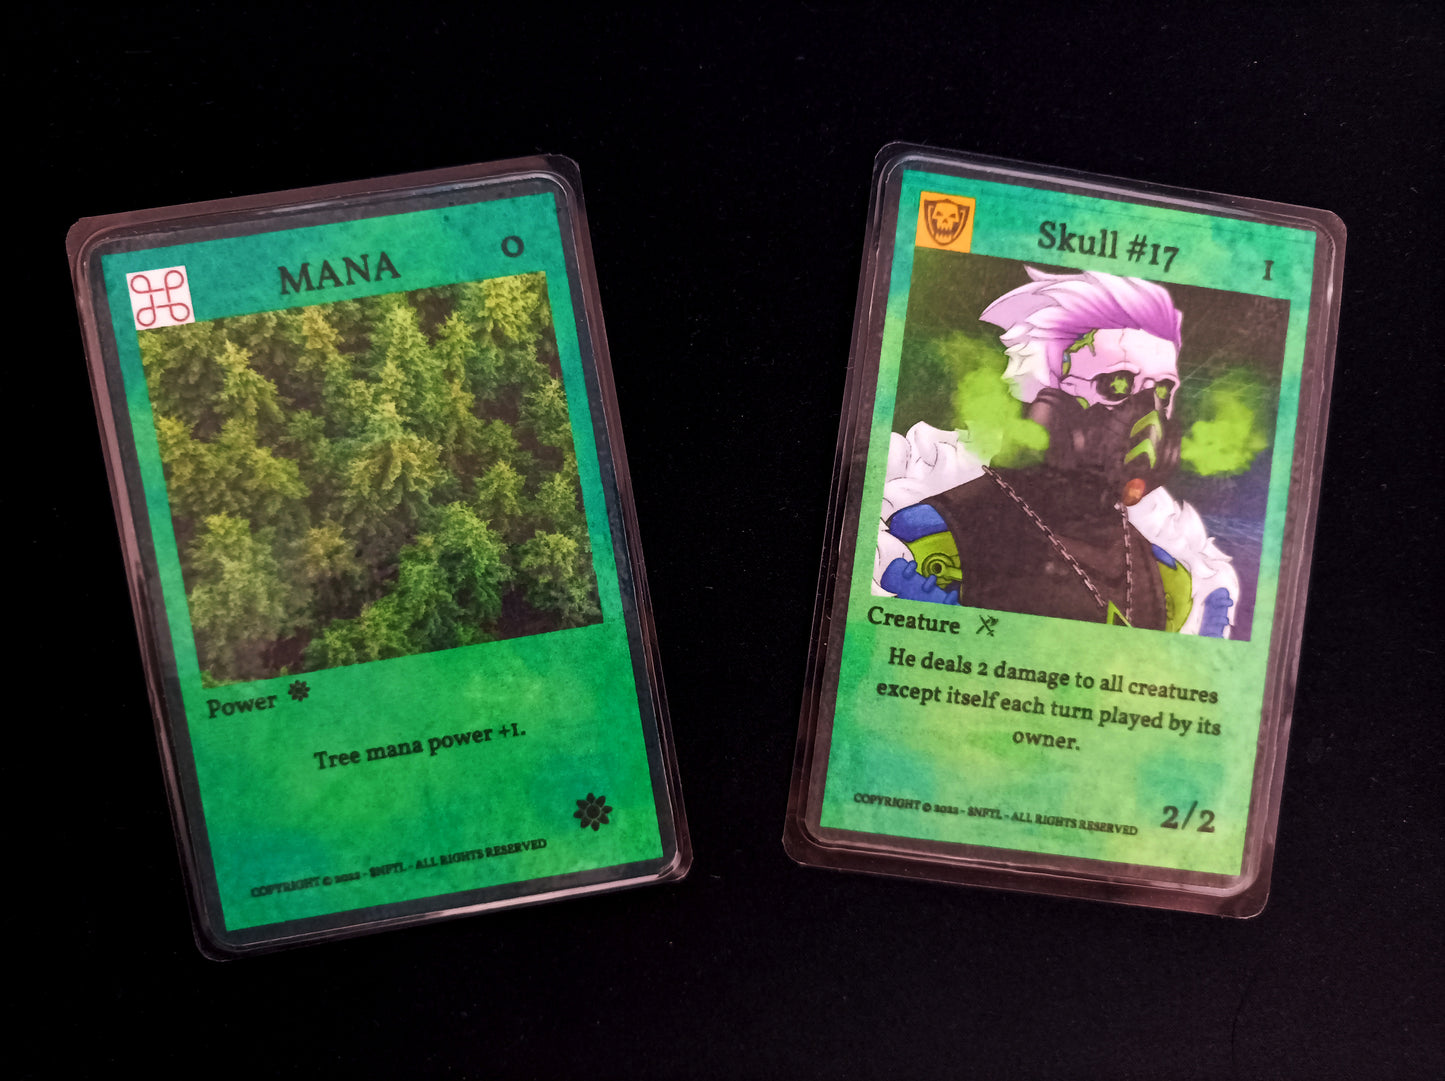 $NFTL Game cards : 1 rare SKULL #17 and 1 common TREE MANA#1